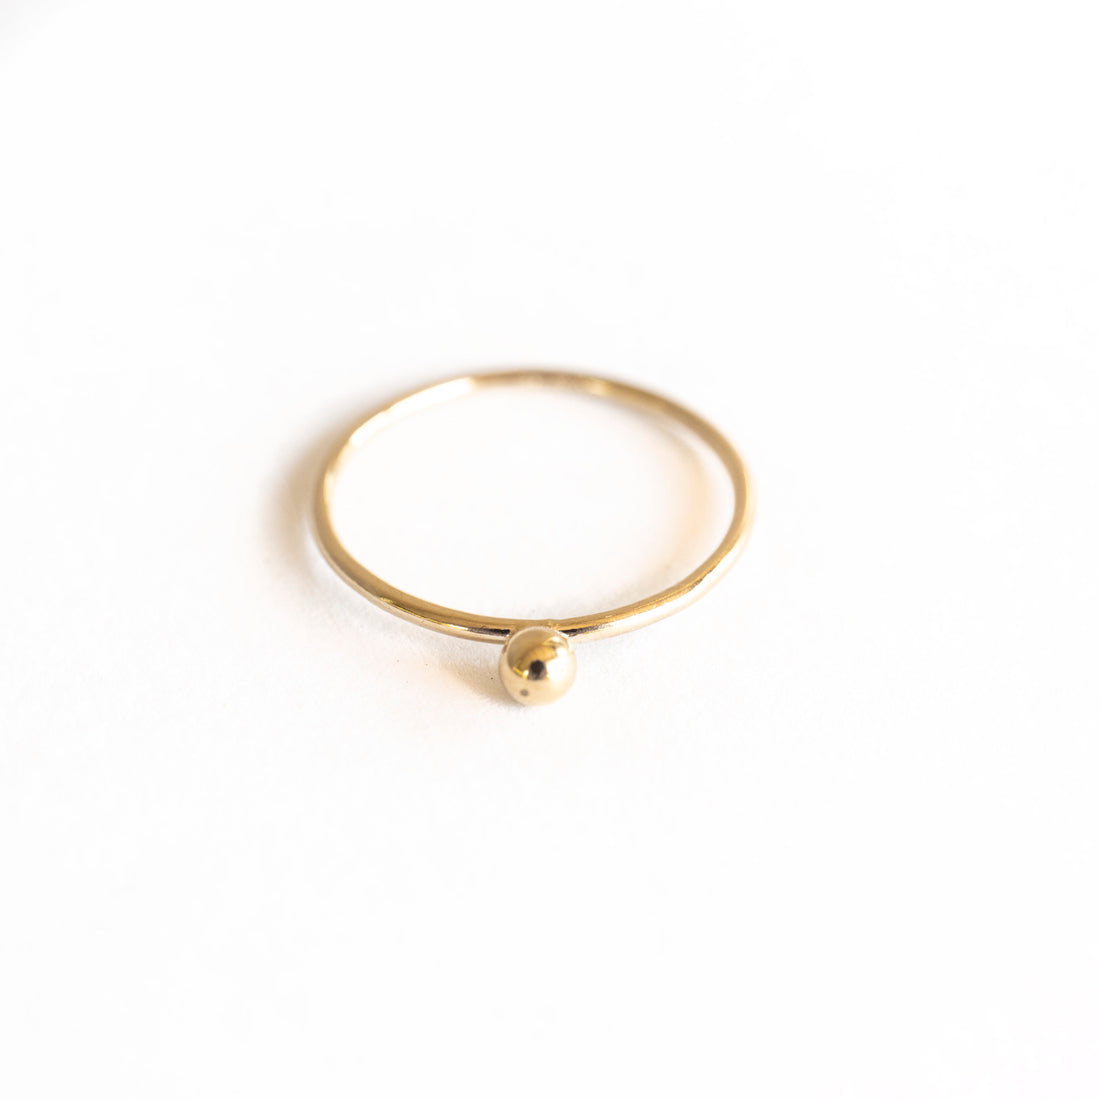 Unique Stackable Gold Ring, Dot Ring, Gold Stackable Ring, Dainty Gold Ring, Gold Stacker, For Him or For Her, Thin Stackable Rings